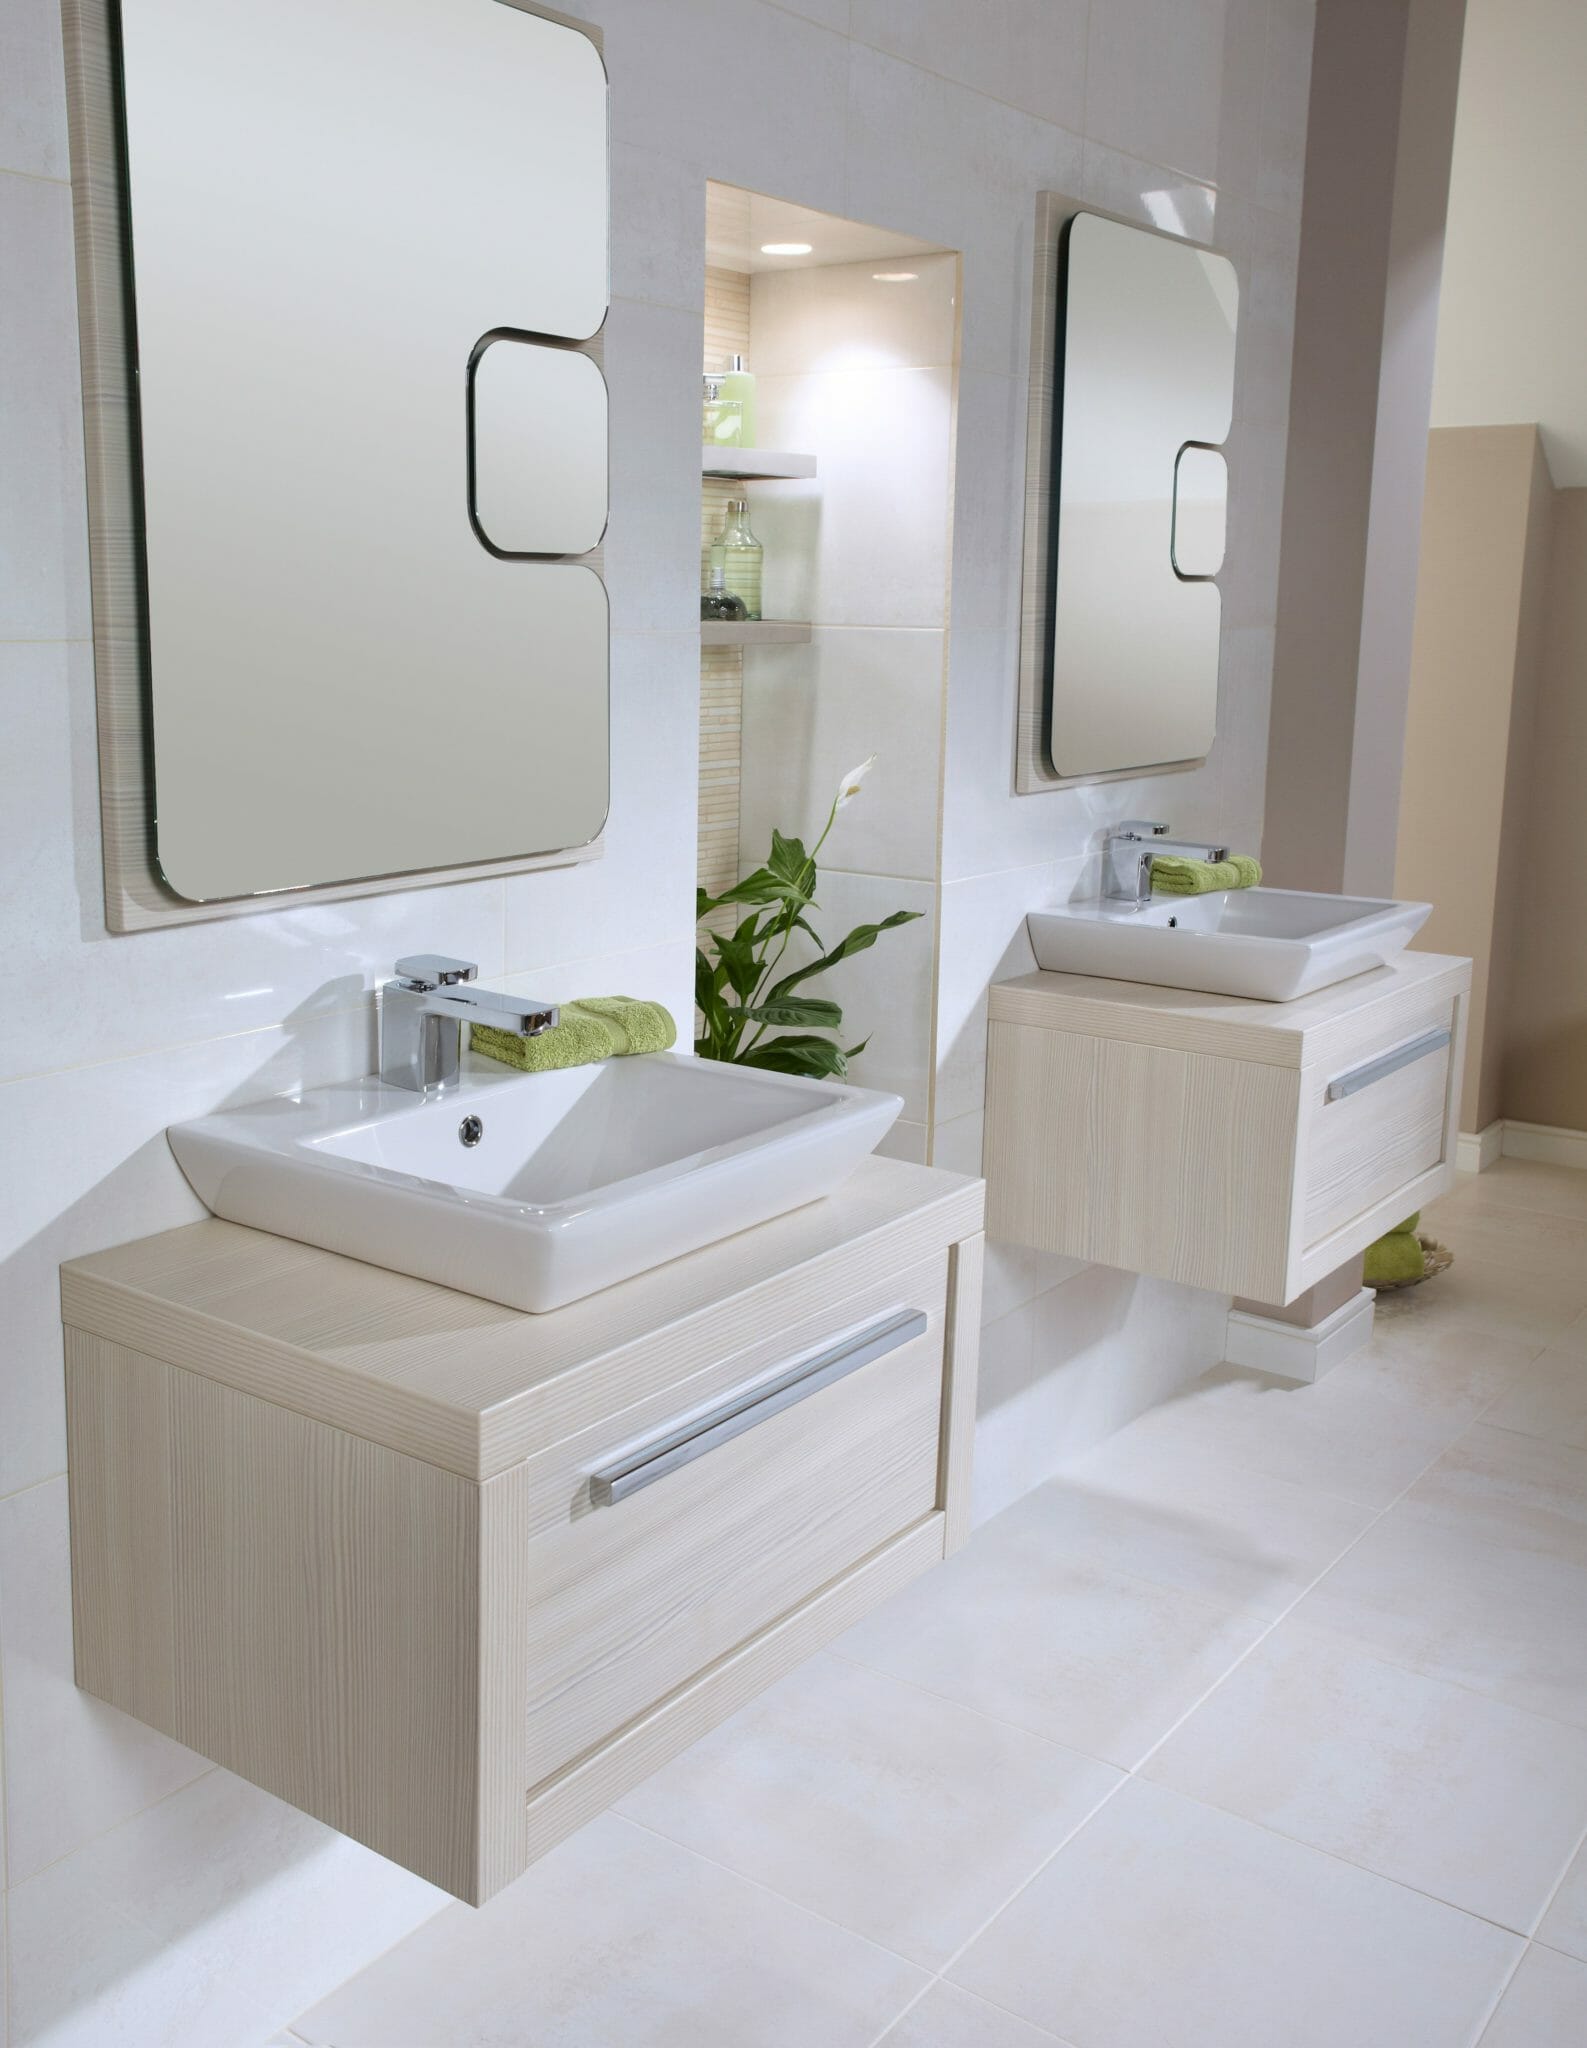 Modular Bathroom Furniture from the Major Leading High Quality Brands